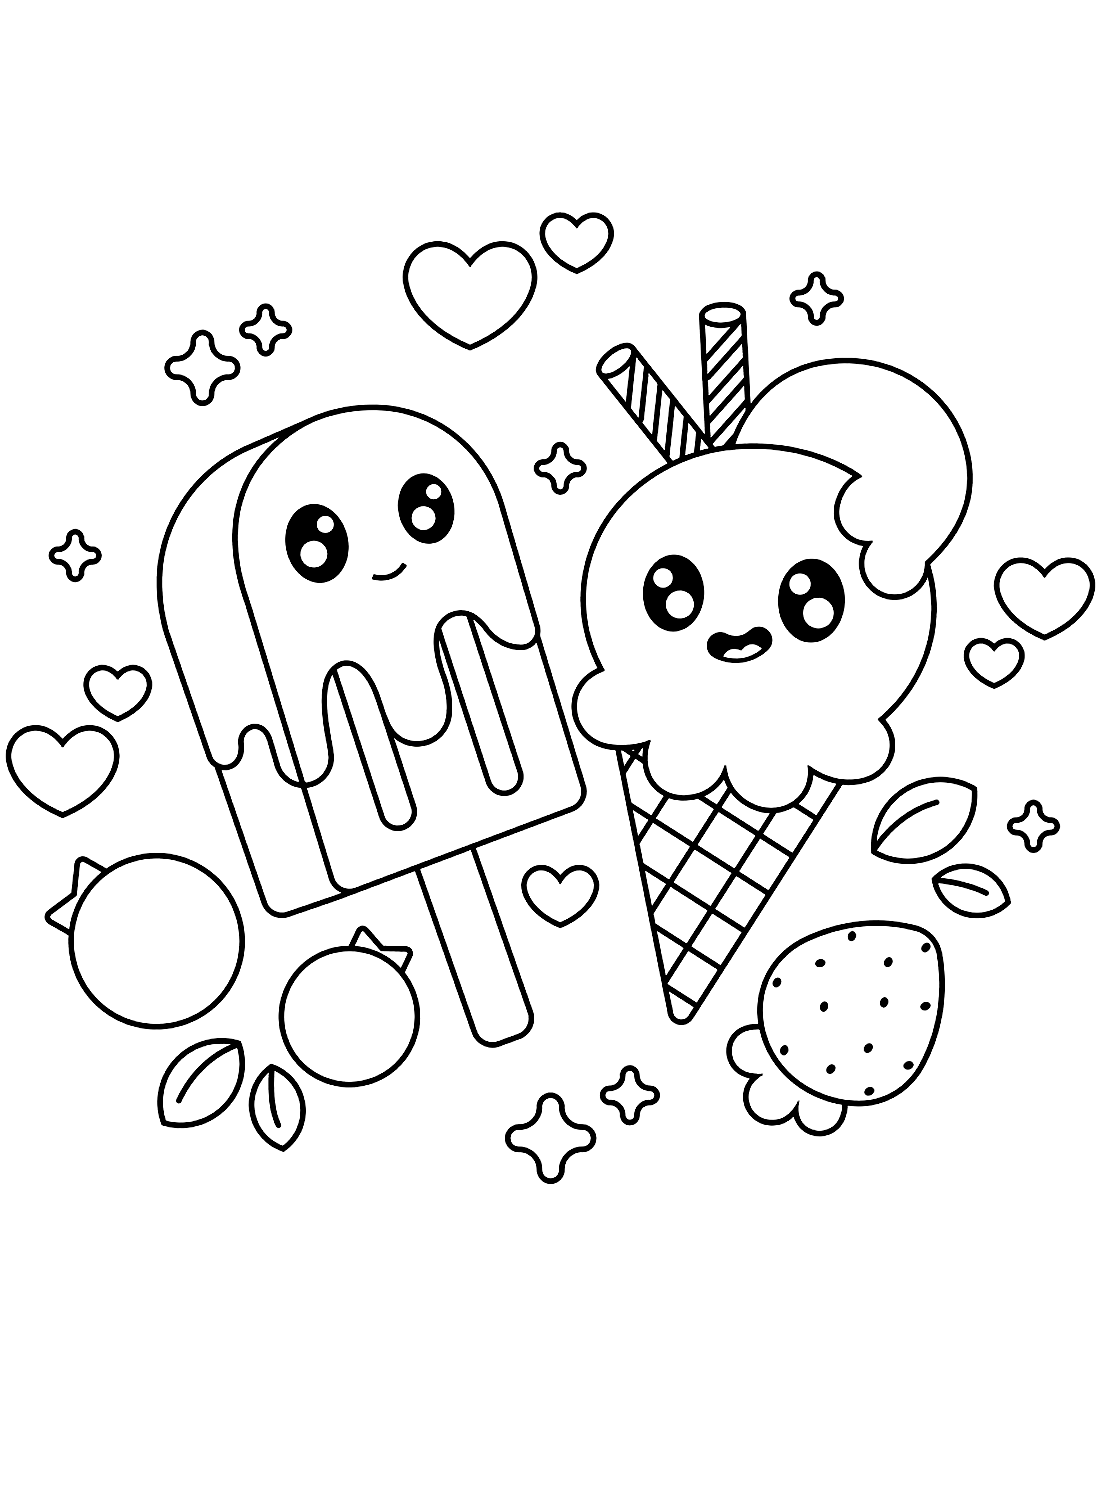 Printable Coloring Pages Ice Cream